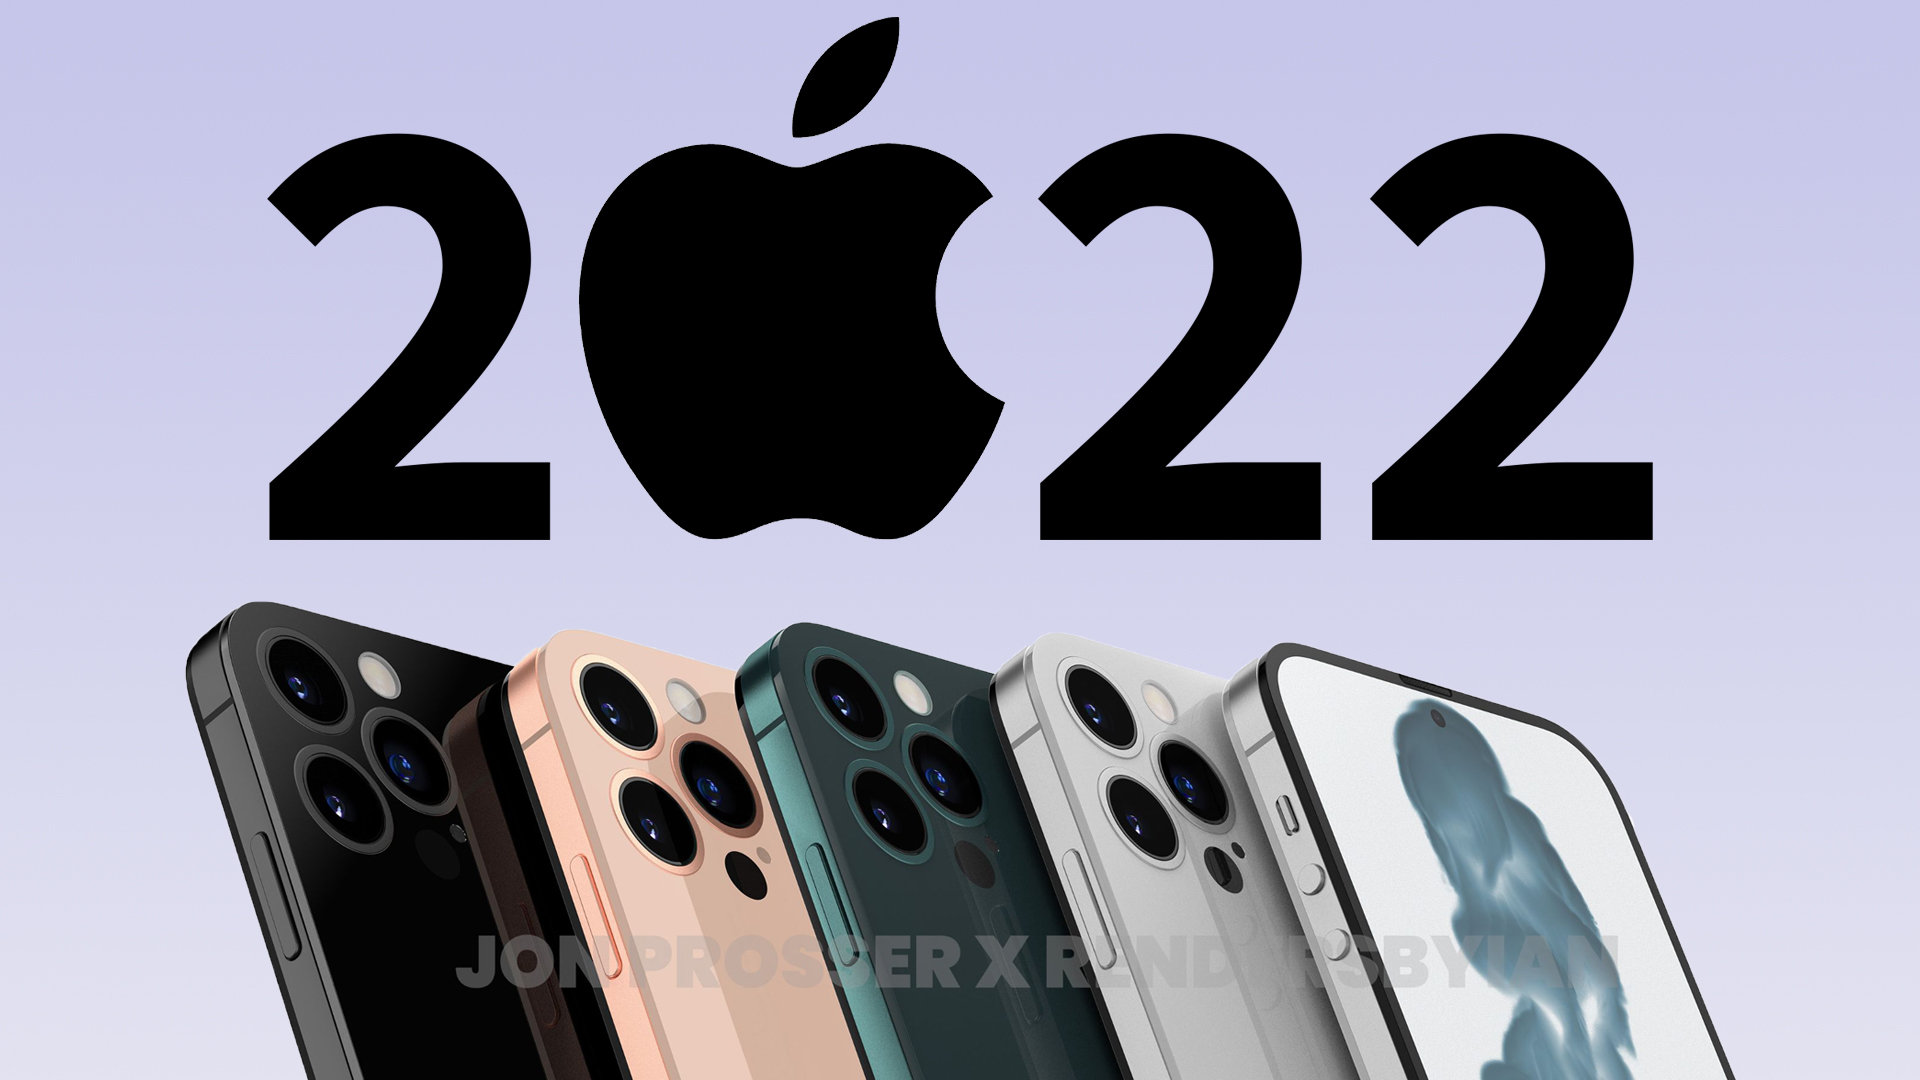 A row of renders of the iPhone 14, below the word 2022 with the 0 formed by the Apple logo